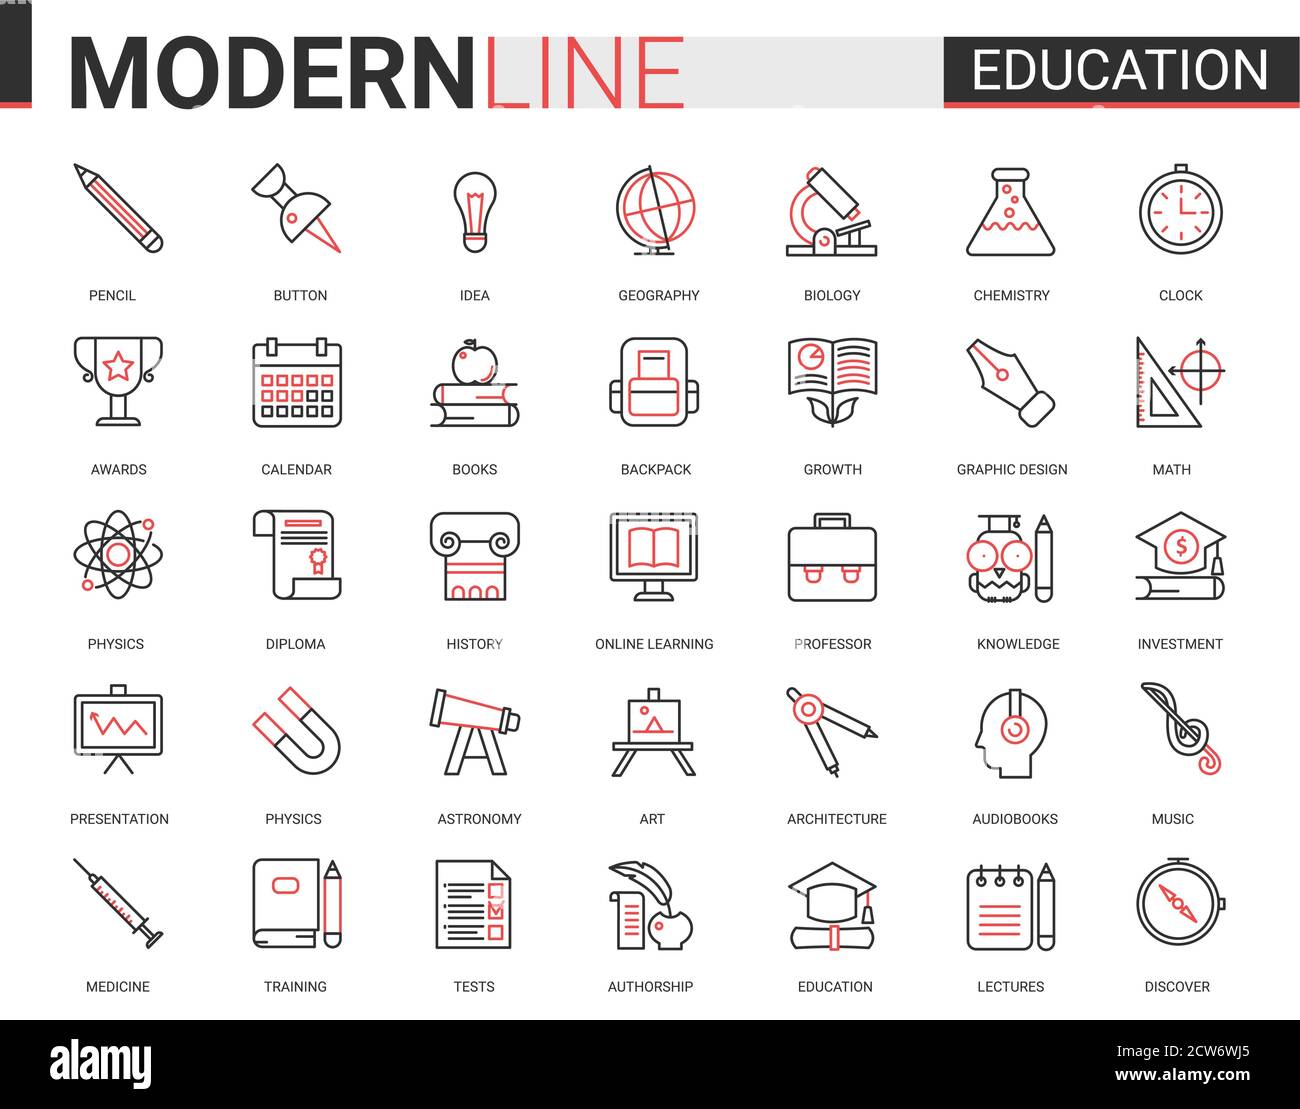 Education flat thin red black line icon vector illustration set with outline infographic school, laboratory or university, educational symbols, lab experiment equipments, school book and stationery Stock Vector